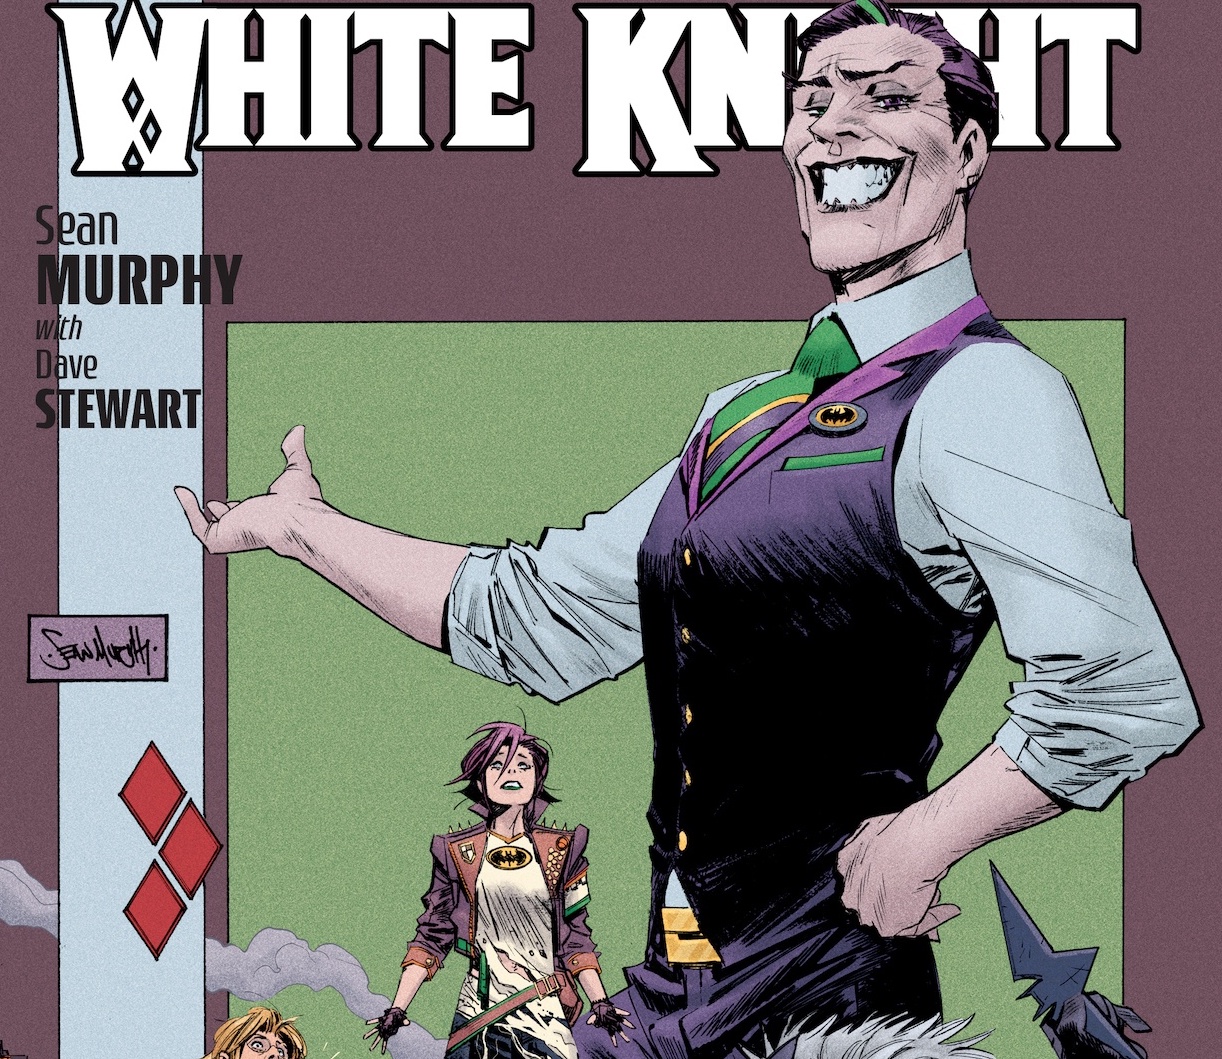 'Batman: Beyond the White Knight' #4 is compelling and action-packed